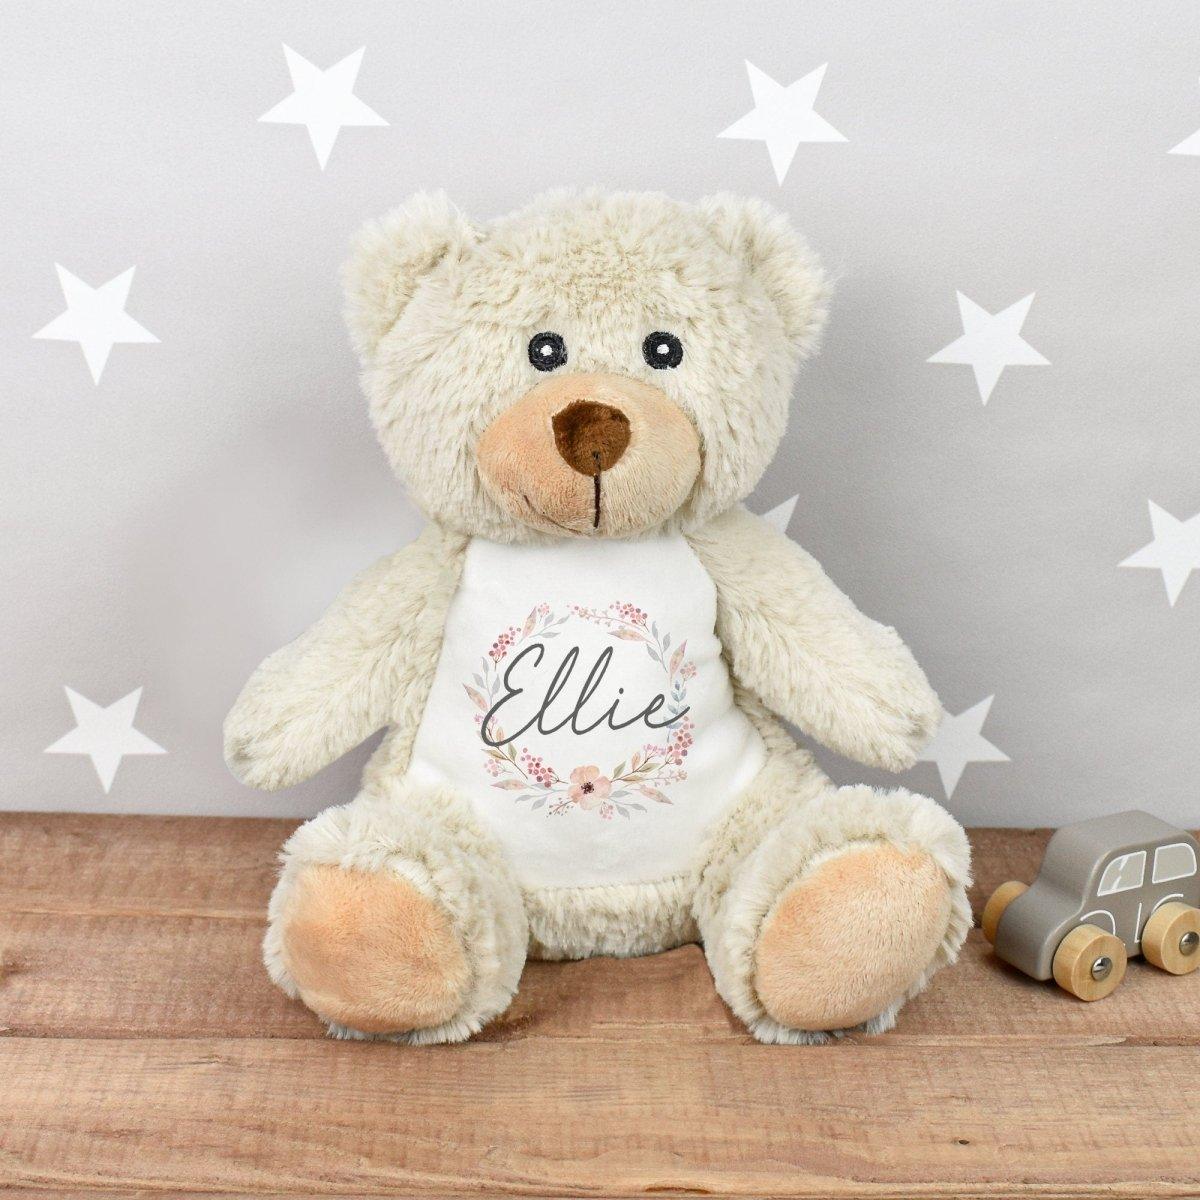 Personalised Teddy Bear, New Baby Gift, Customised Cuddly Toy, Baby Shower Gift, Baby Girl Gift, Baby Boy Gift, New Arrival Baby Gift, Teddy - Amy Lucy